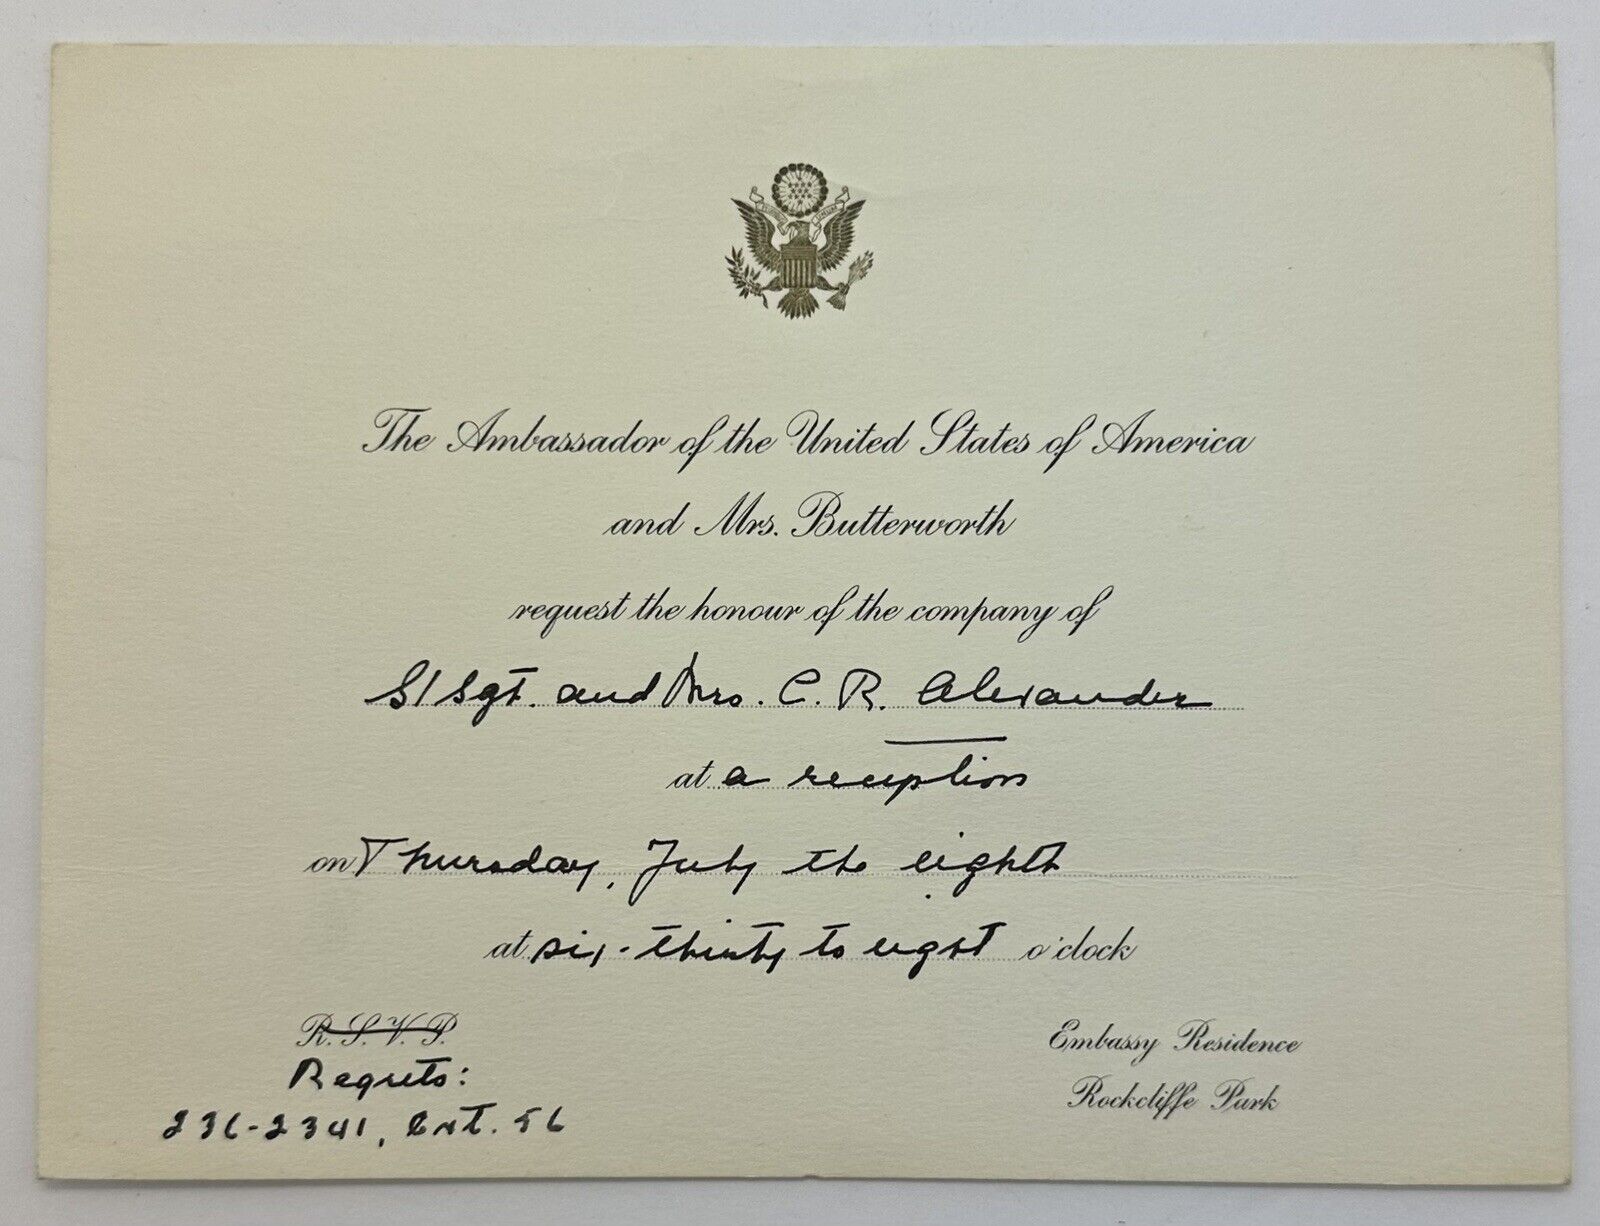 VTG The Ambassador Of The United States Of America Reception Request Card